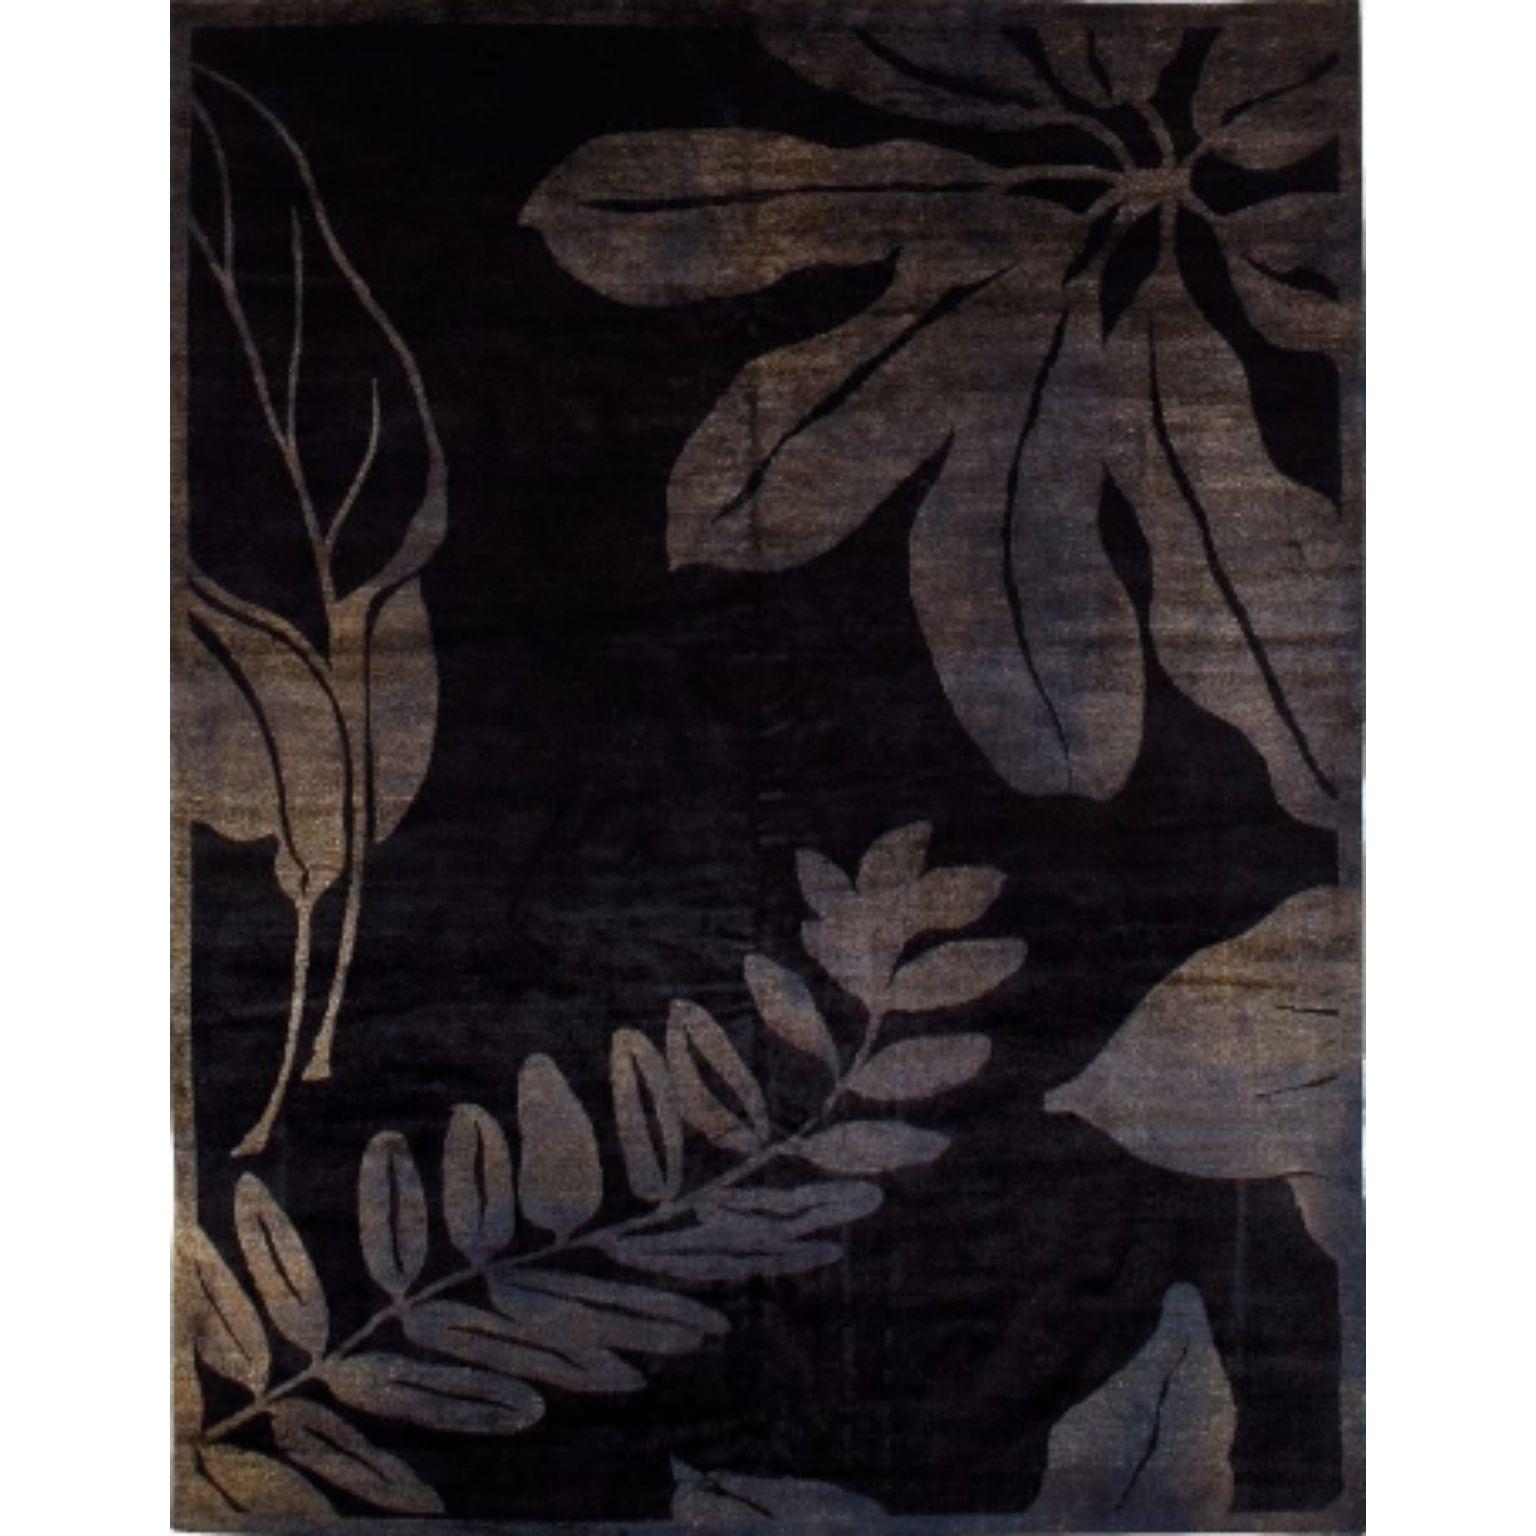 MAKAO 200 rug by Illulian
Dimensions: D300 x H200 cm 
Materials: Wool 50% , Silk 50%
Variations available and prices may vary according to materials and sizes. 

Illulian, historic and prestigious rug company brand, internationally renowned in